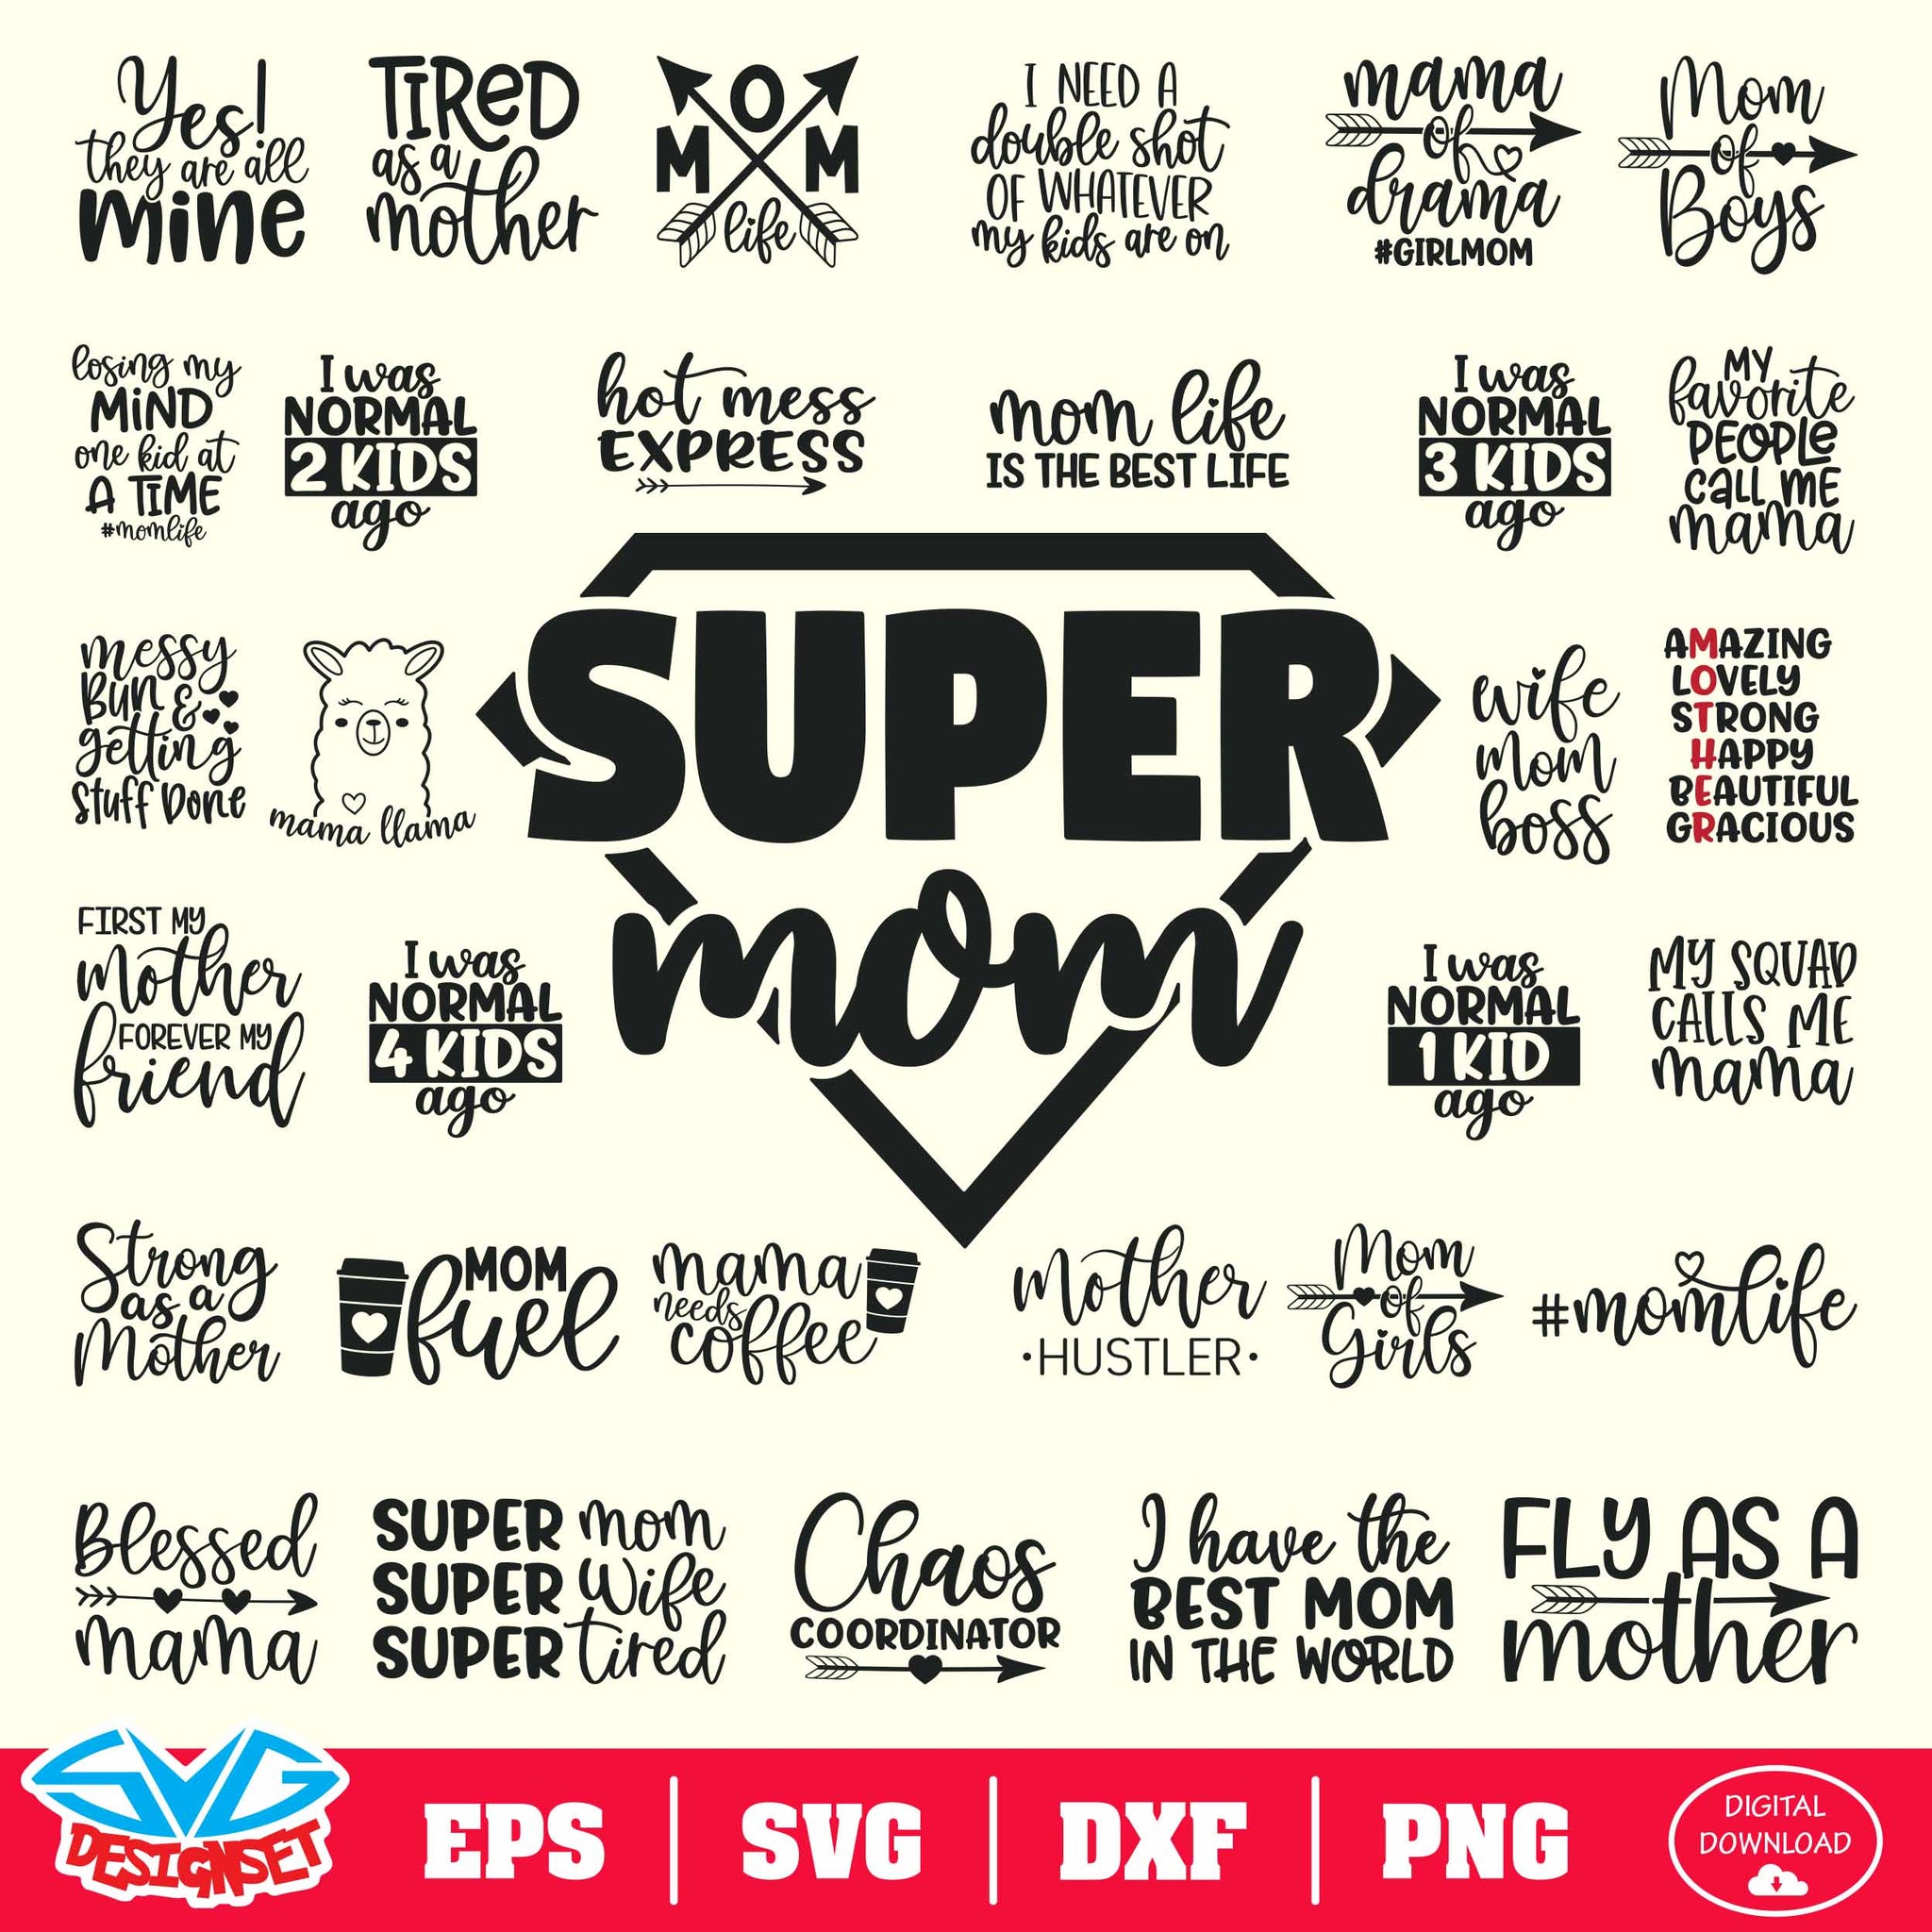 Happy Mother's Day Bundle Svg, Dxf, Eps, Png, Clipart, Silhouette and Cutfiles #4 - SVGDesignSets